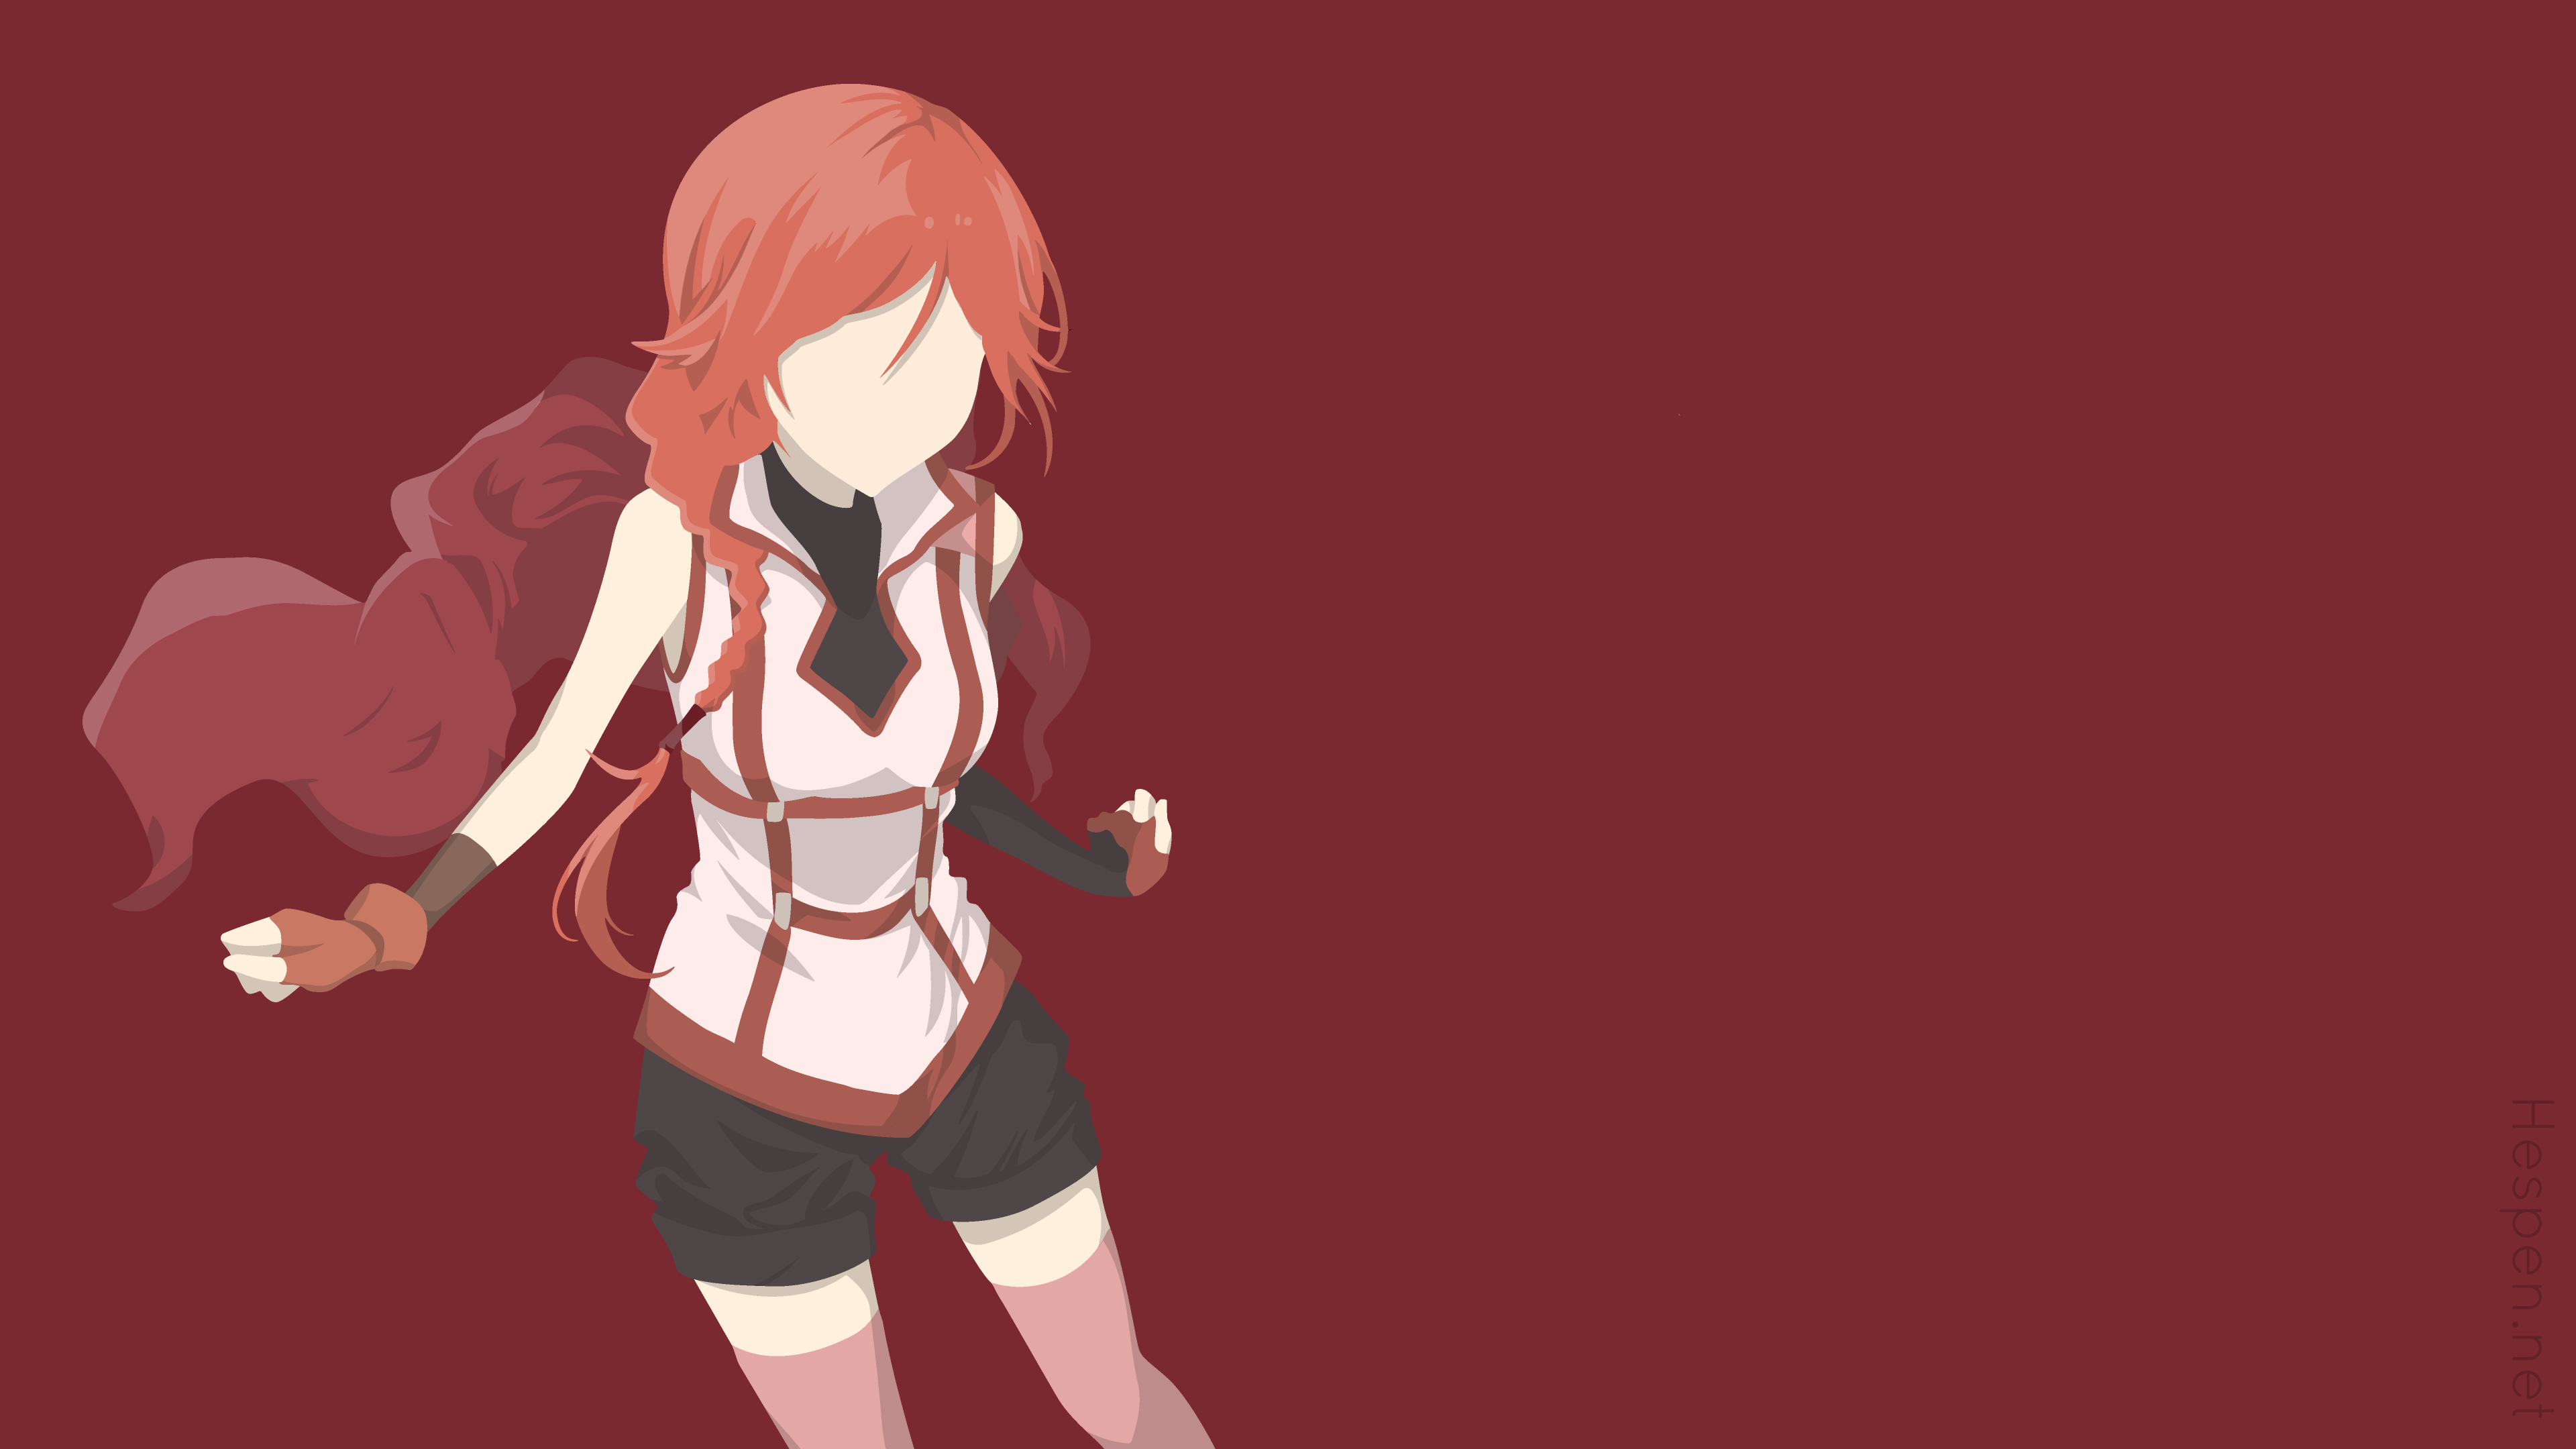 Anime 3840x2160 Hai to Gensou no Grimgar Yume (character) anime girls red background simple background redhead anime long hair